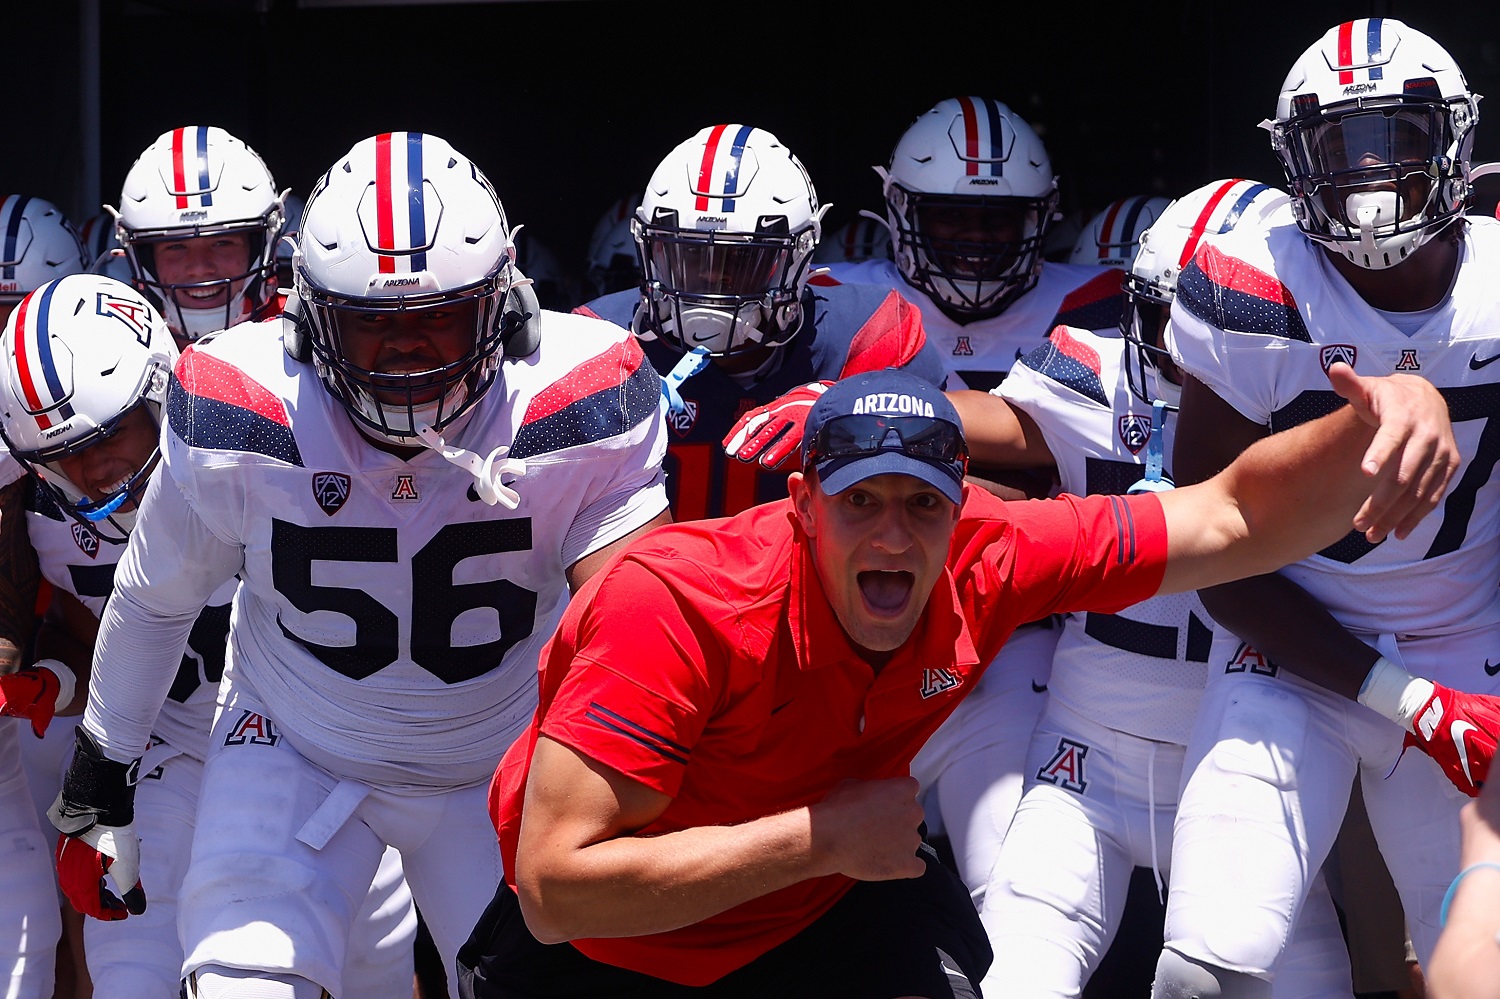 Former University of Arizona tight end Rob Gronkowski leads players onto the field before the Wildcats' annual spring game on April 24, 2021. | Christian Petersen/Getty Images